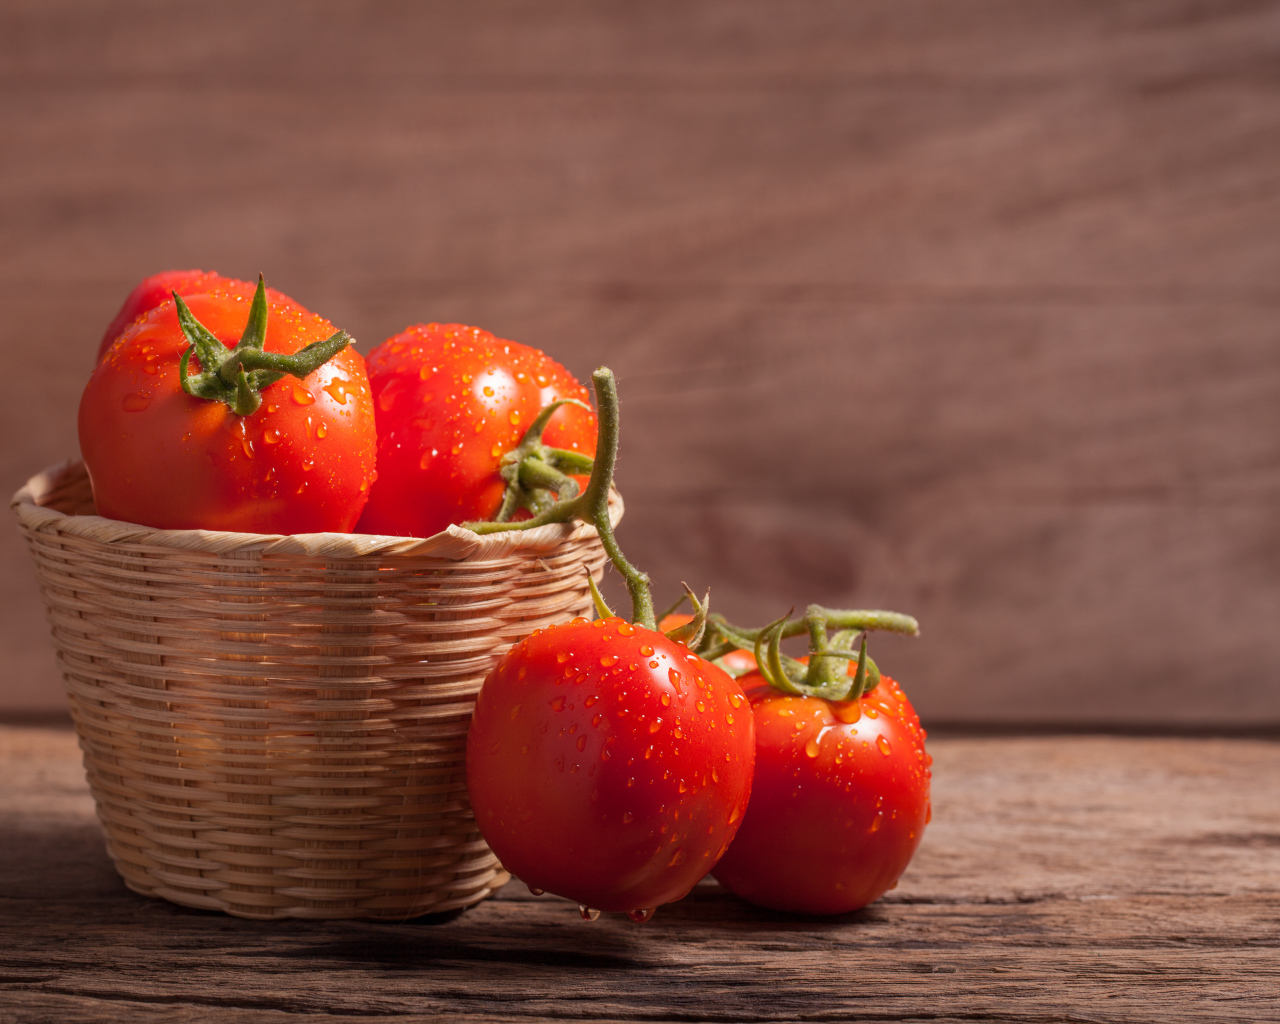 Beautiful red wet tomatoes in a basket on the table